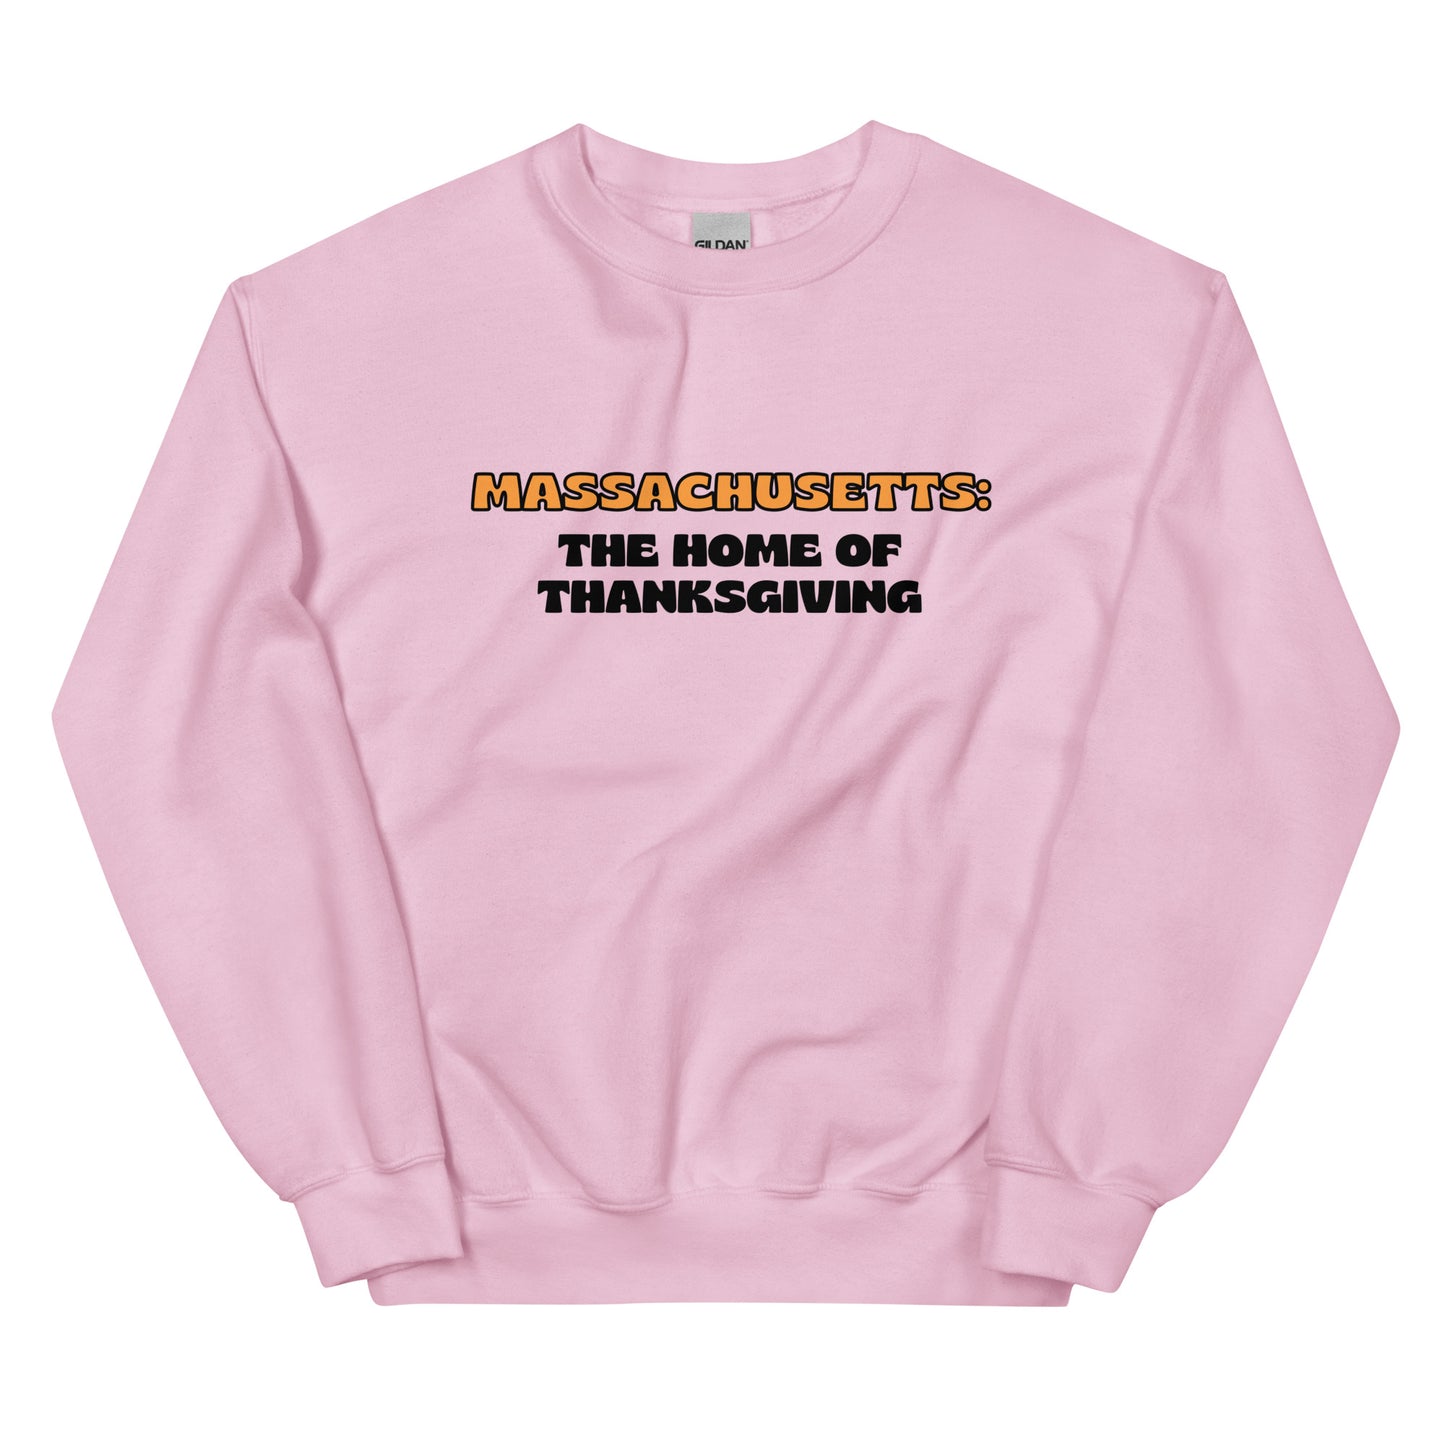 The Home of Thanksgiving Crewneck